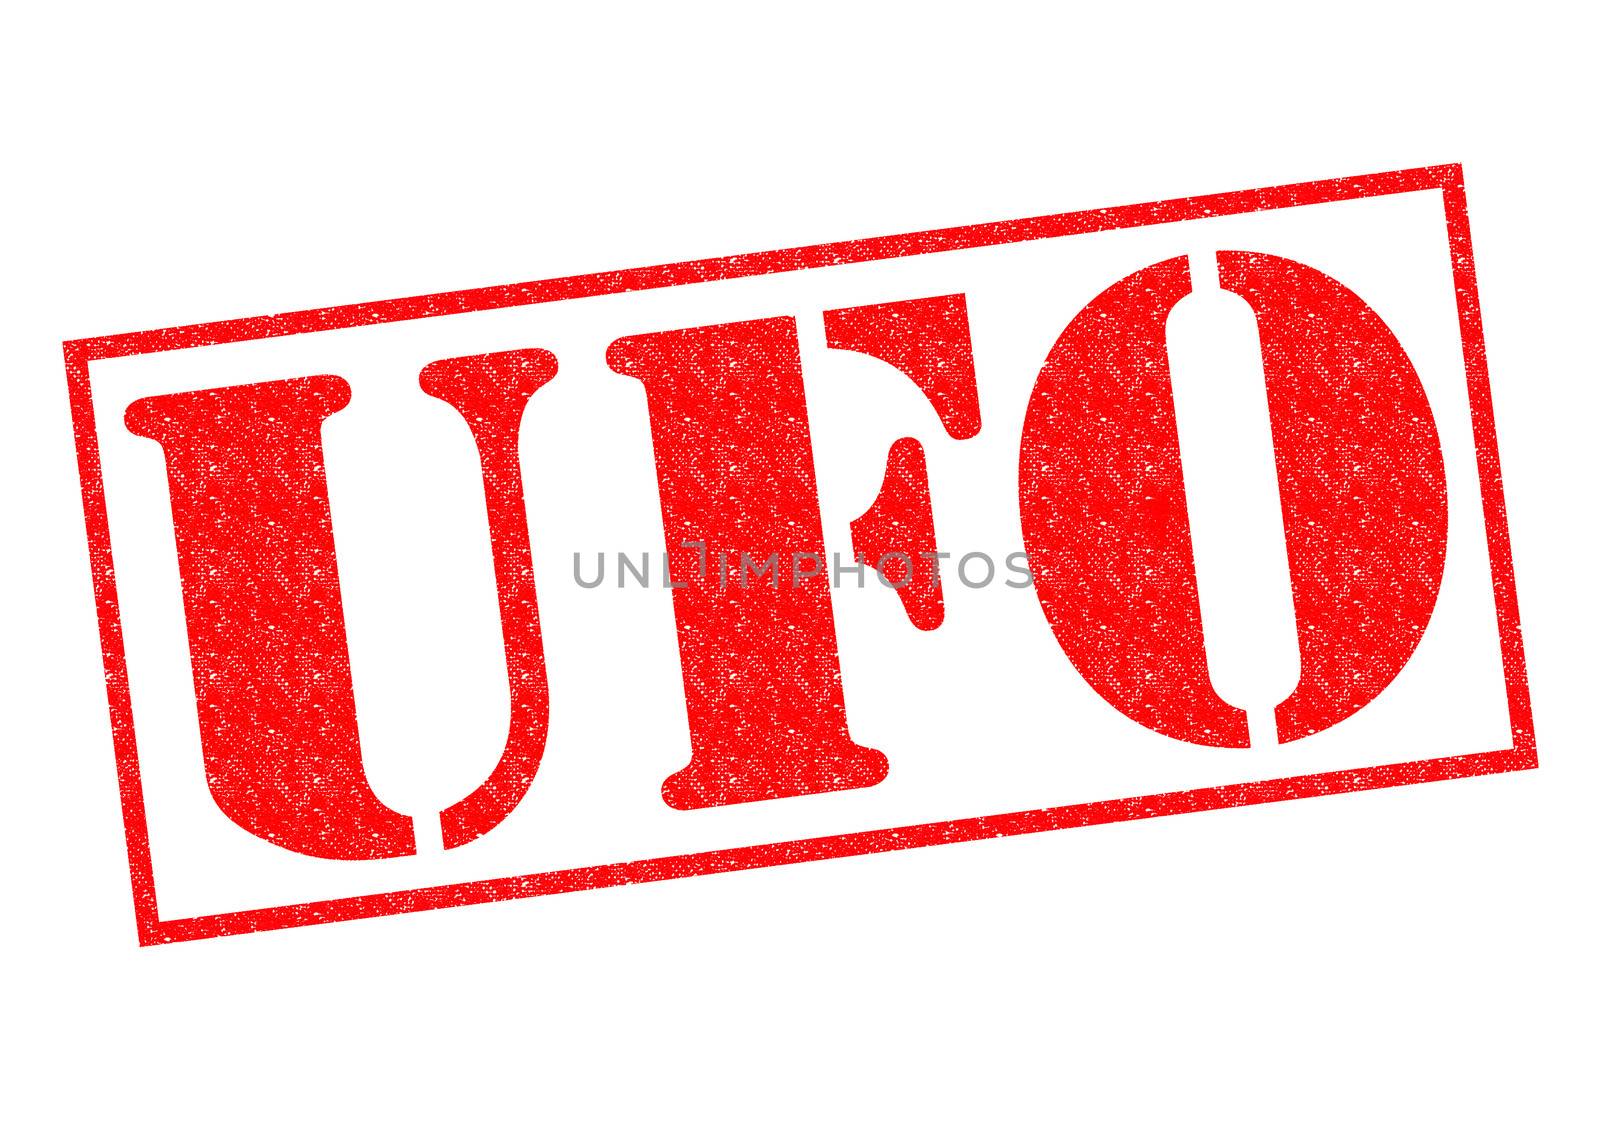 UFO red Rubber Stamp over a white background.